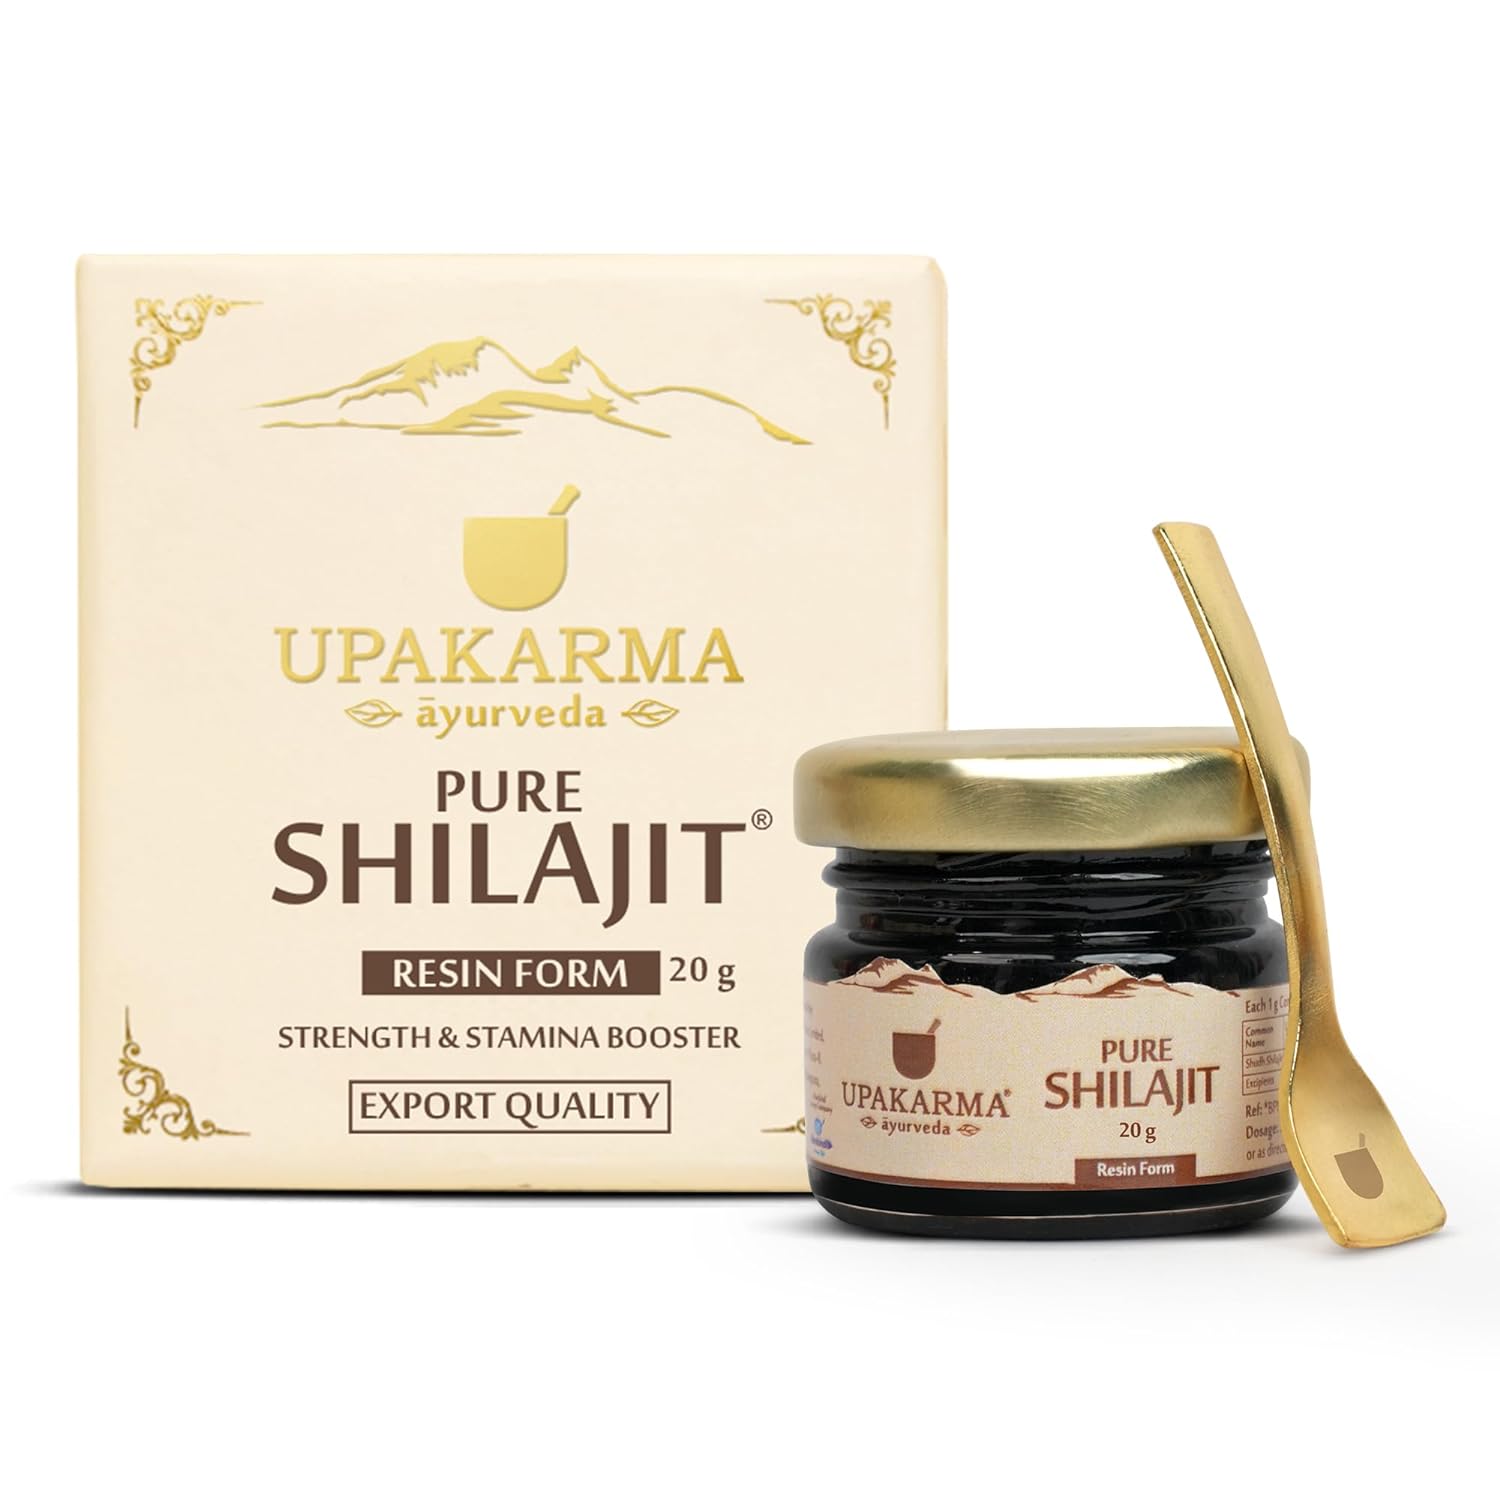 UPAKARMA Ayurveda | 100% Ayurvedic, 20g Original And Pure Shilajit/Shilajeet Resin | Helps To Boost Performance, Power, Stamina, Endurance, Strength And Overall Wellbeing For Men And Women |